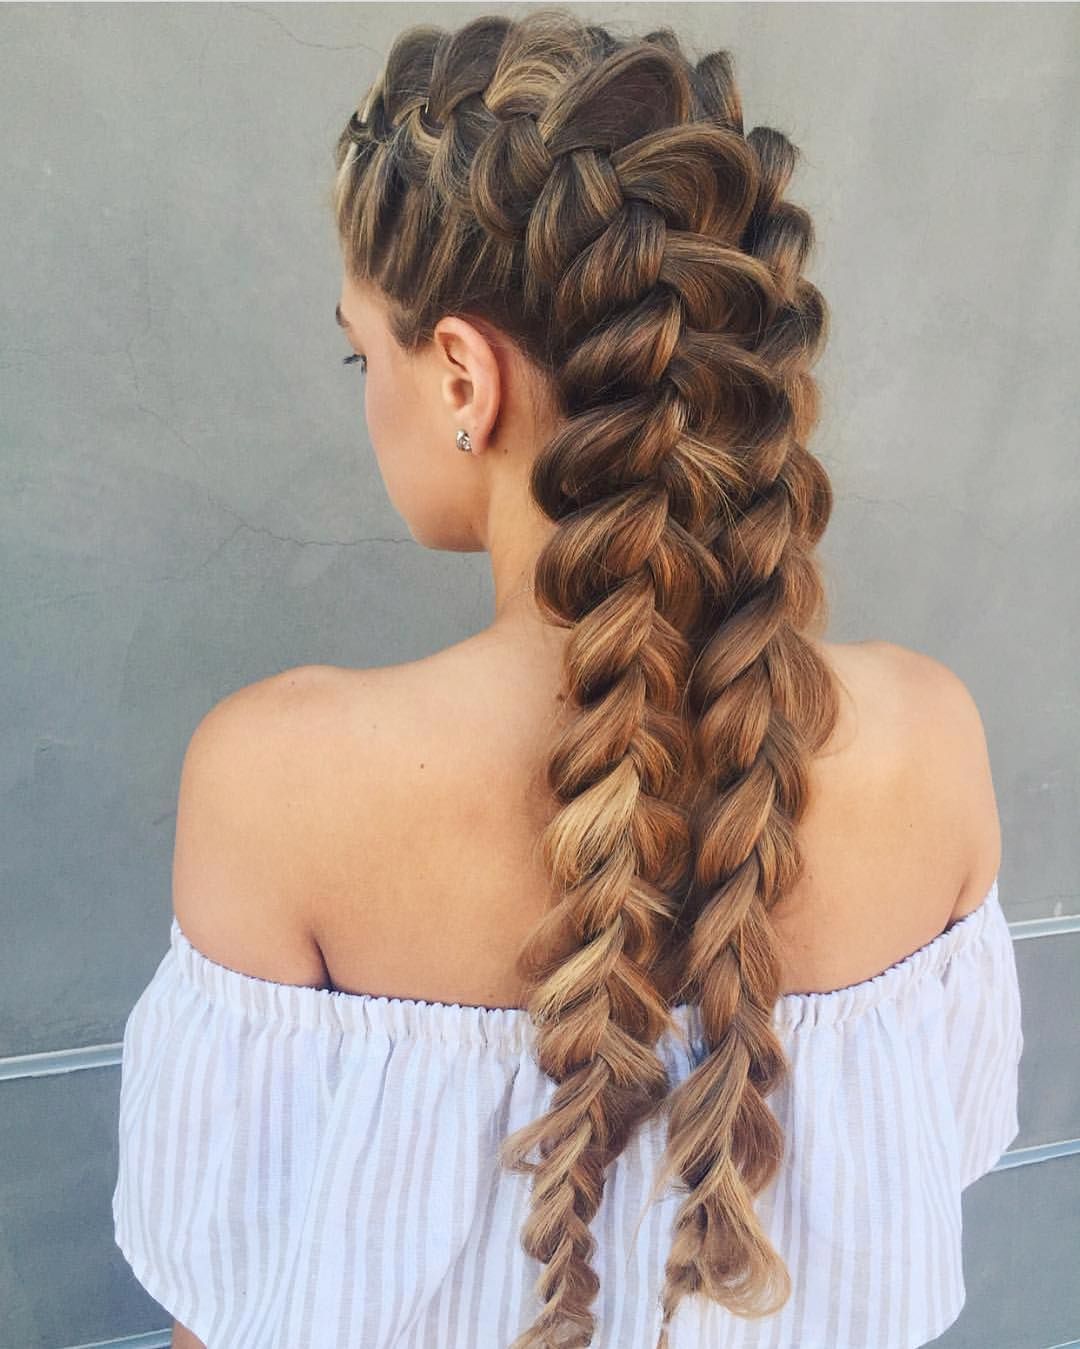 French Braid Pigtails Hairstyle